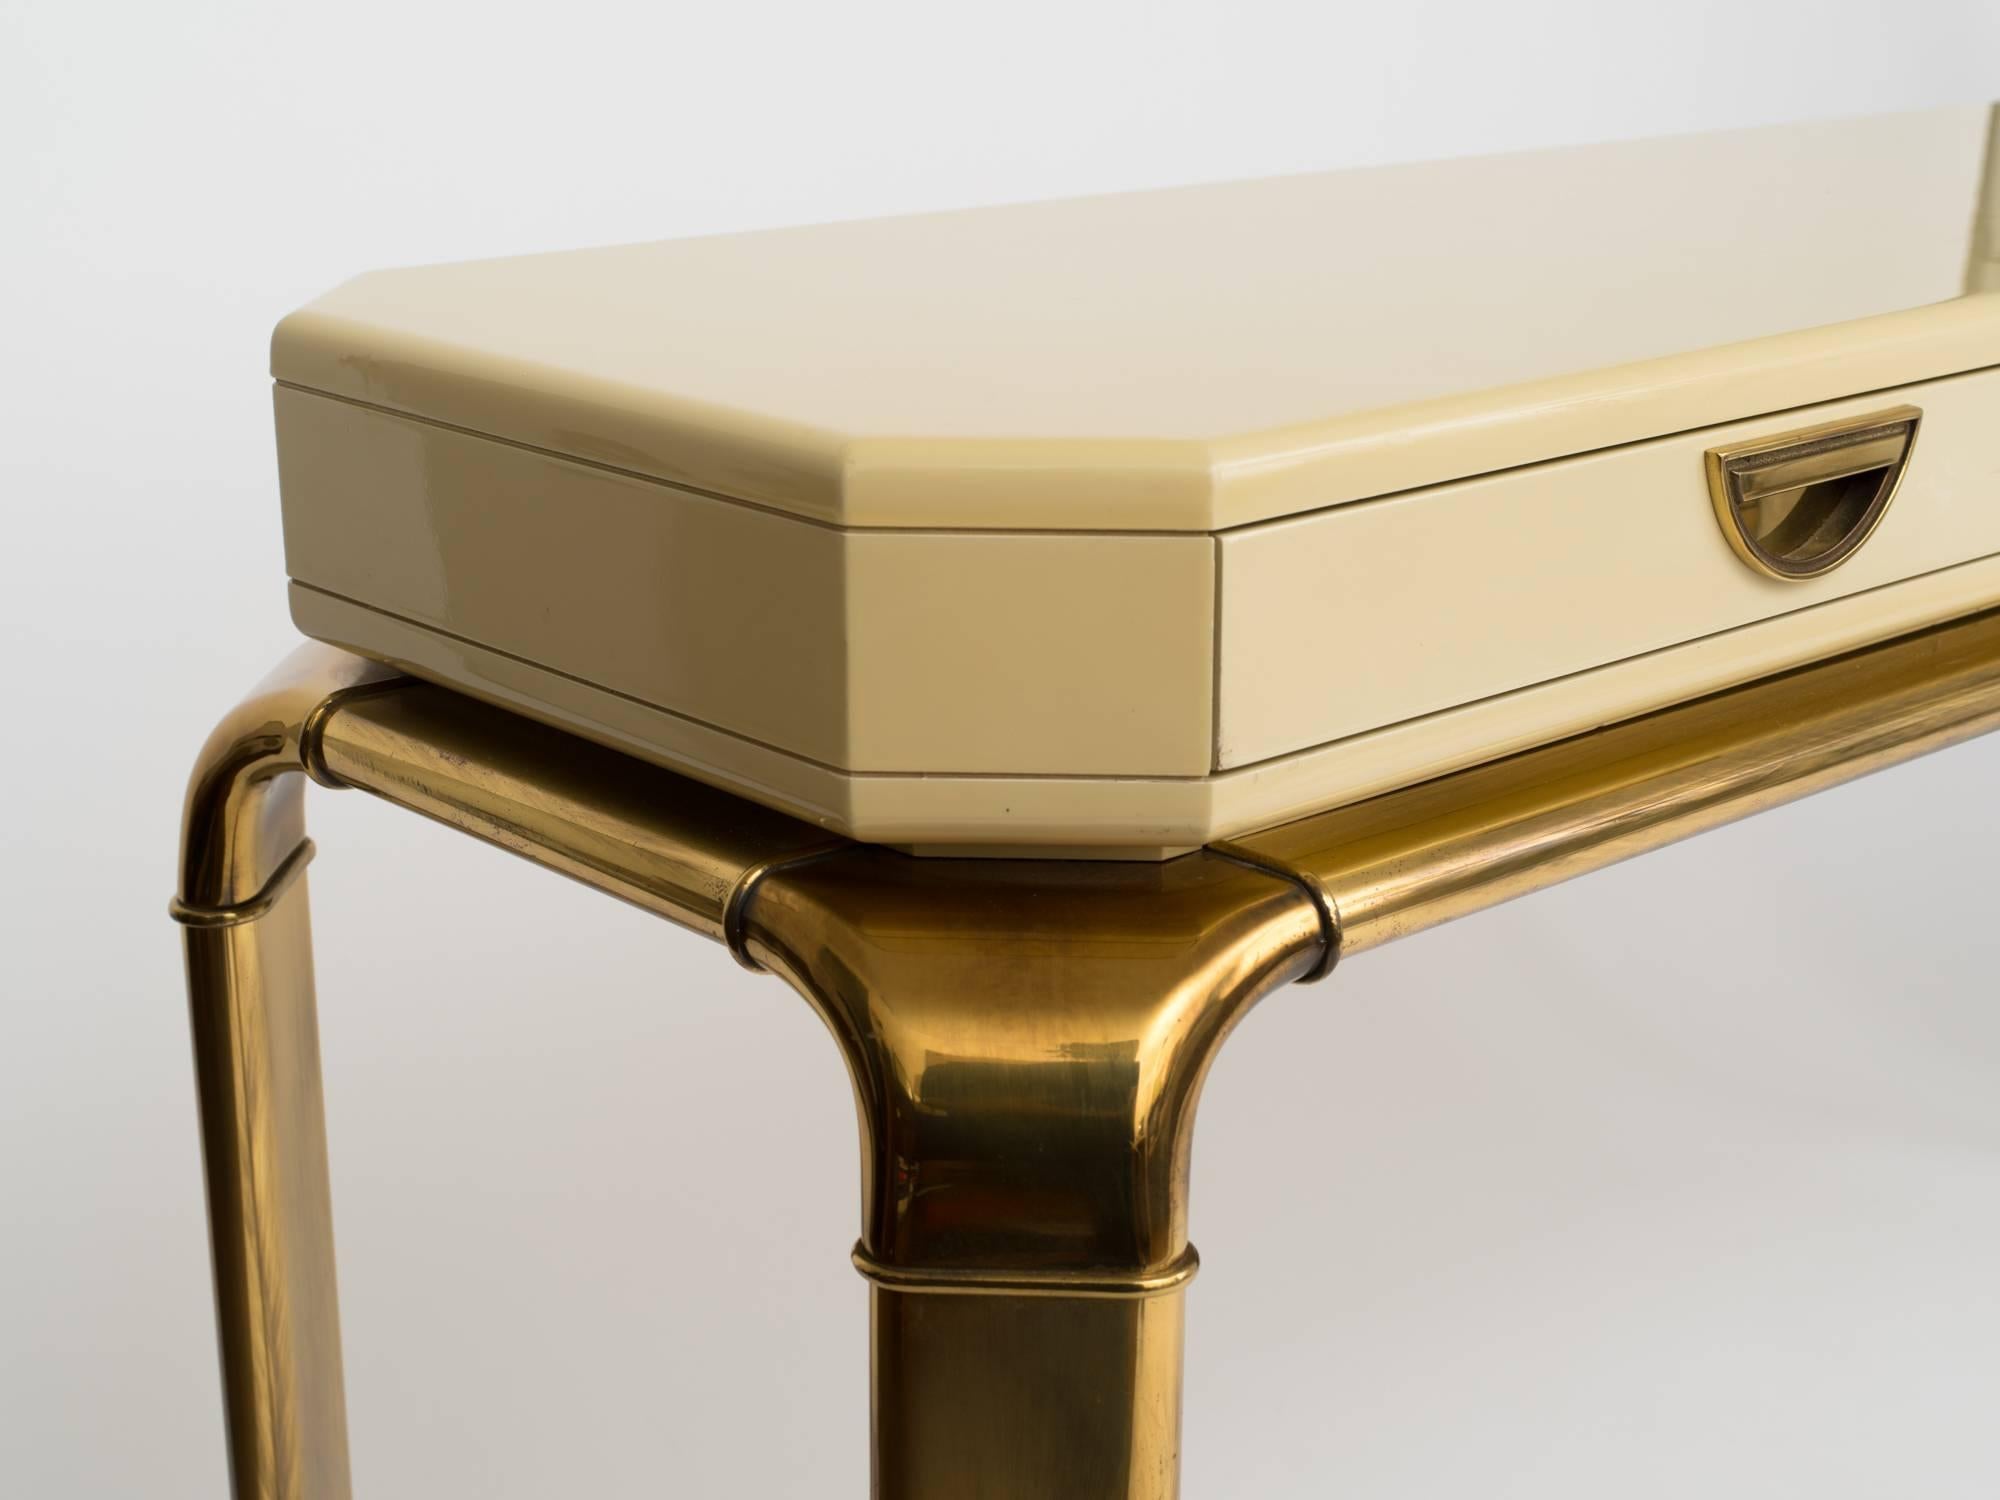 1970s ivory lacquer console table with brass drawer pulls and frame. Mastercraft for John Widdicomb, Grand Rapids. MI.